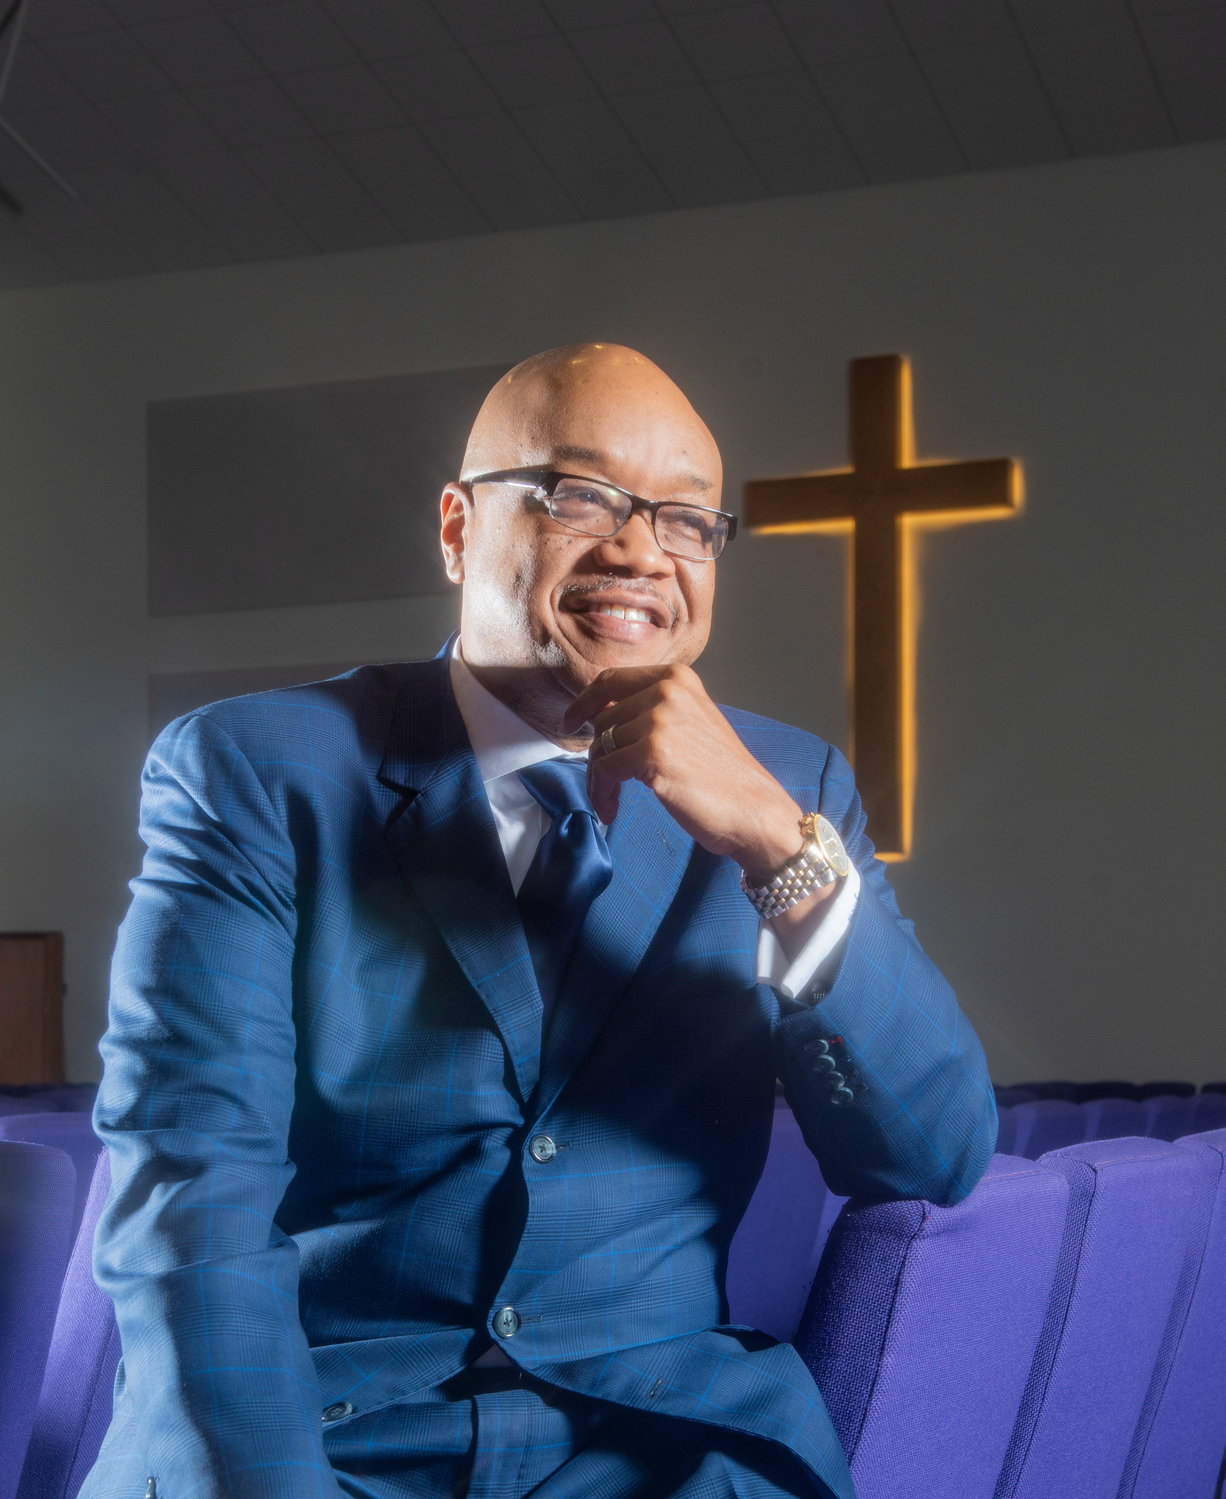 Brian Thompson spent 20 years as the dynamic leader of Simon Temple AME Zion Church on Yadkin Road. In June he was elected to the Board of Bishops of the Worldwide African Methodist Episcopal Zion Church.